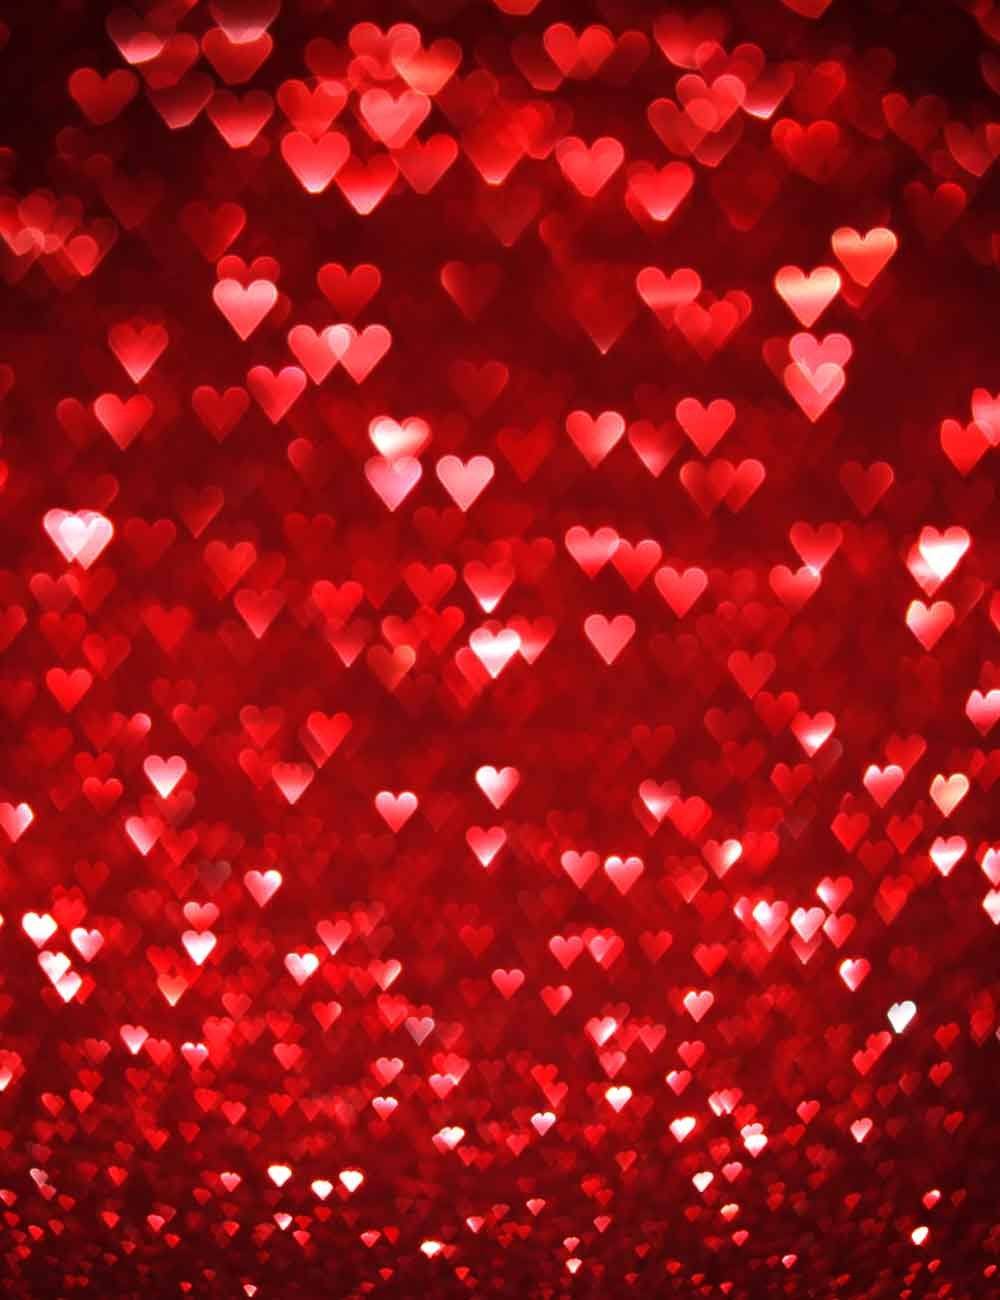 Red Hearts Sparkles For Wedding Photography Backdrop – Shopbackdrop